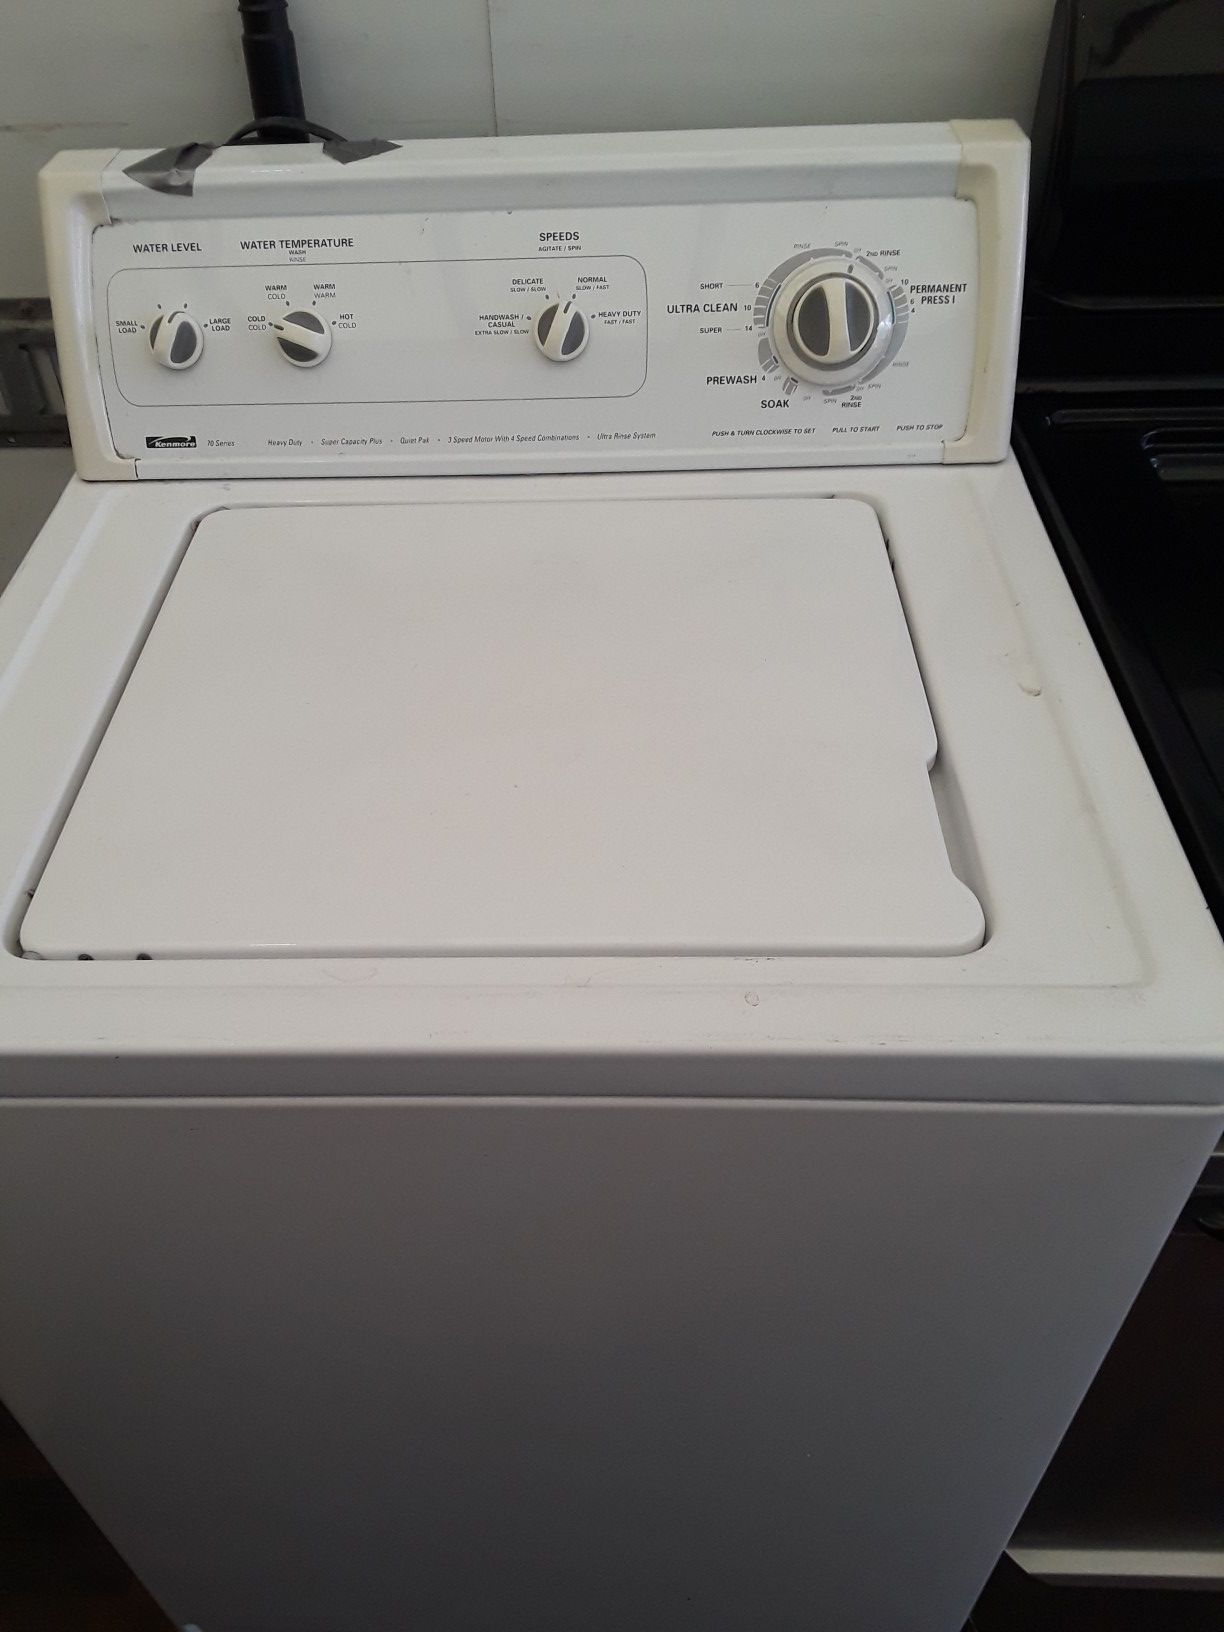 Kenmore washer 150